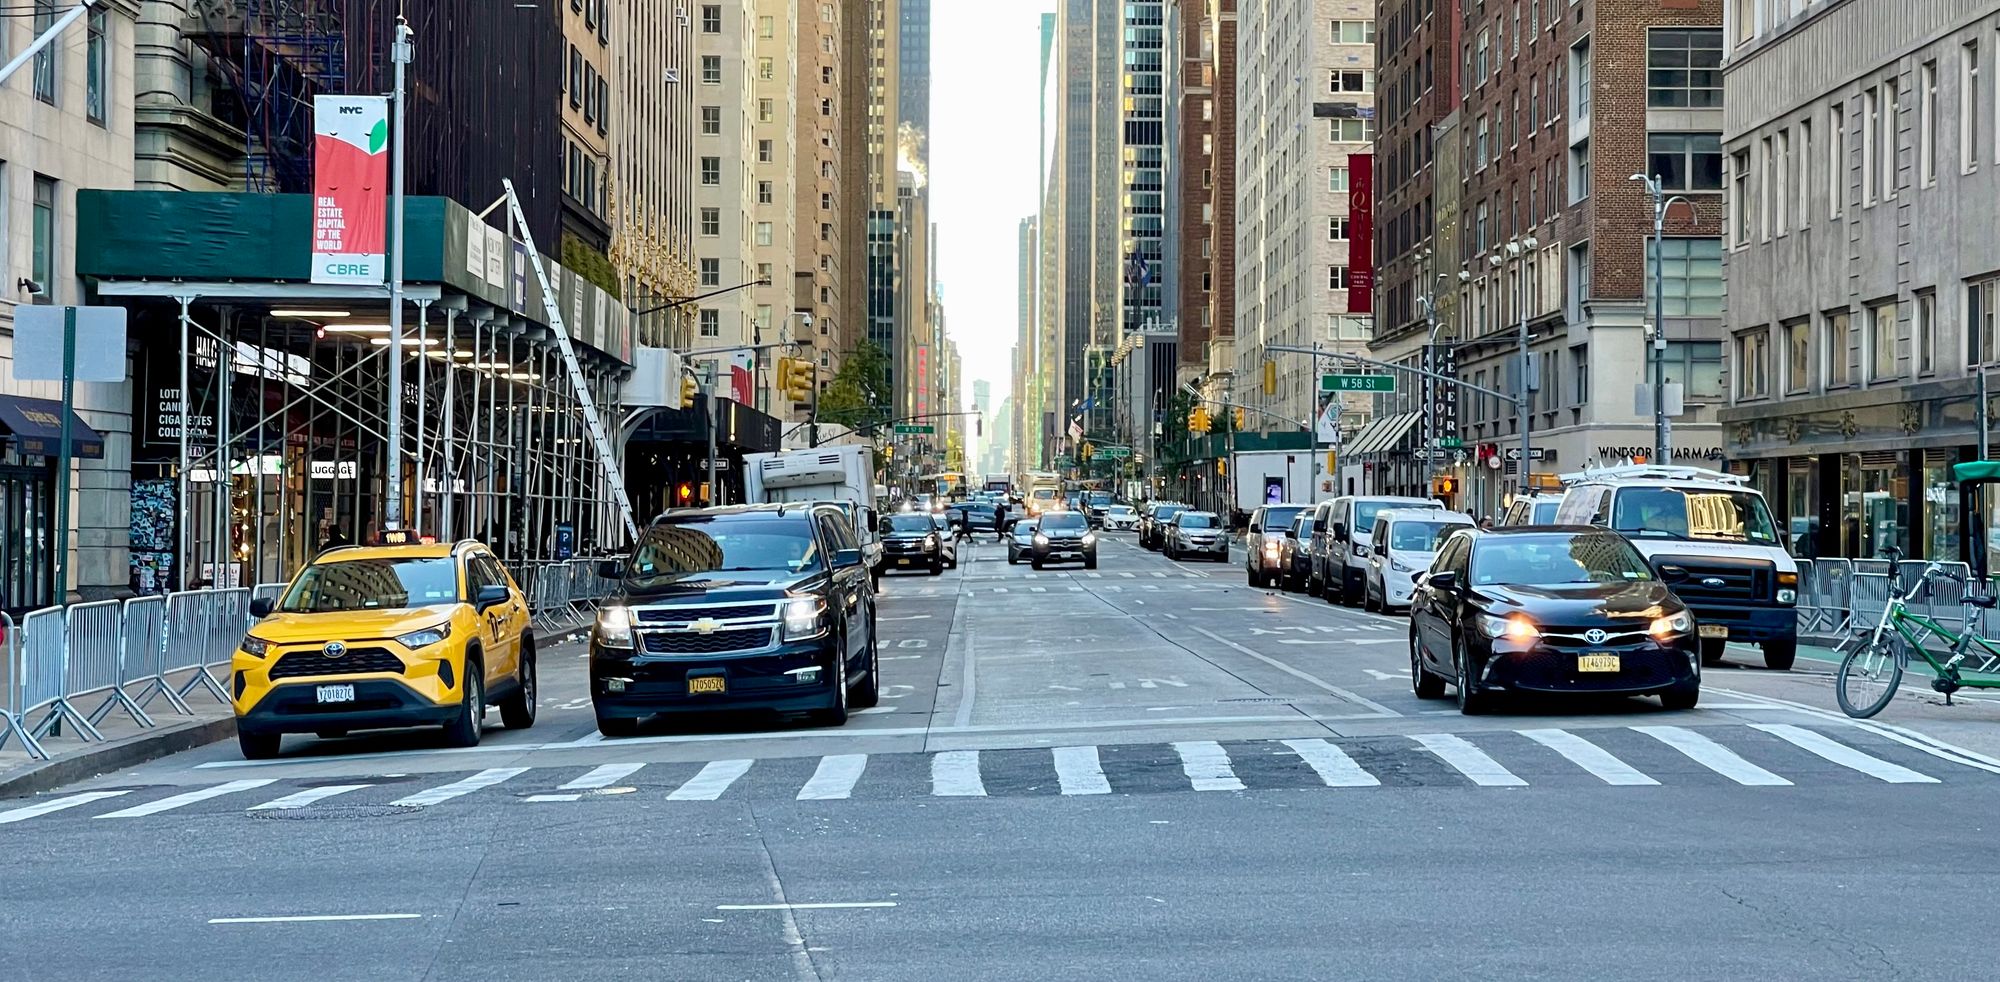 5th Avenue to close to car traffic in December for first time ever